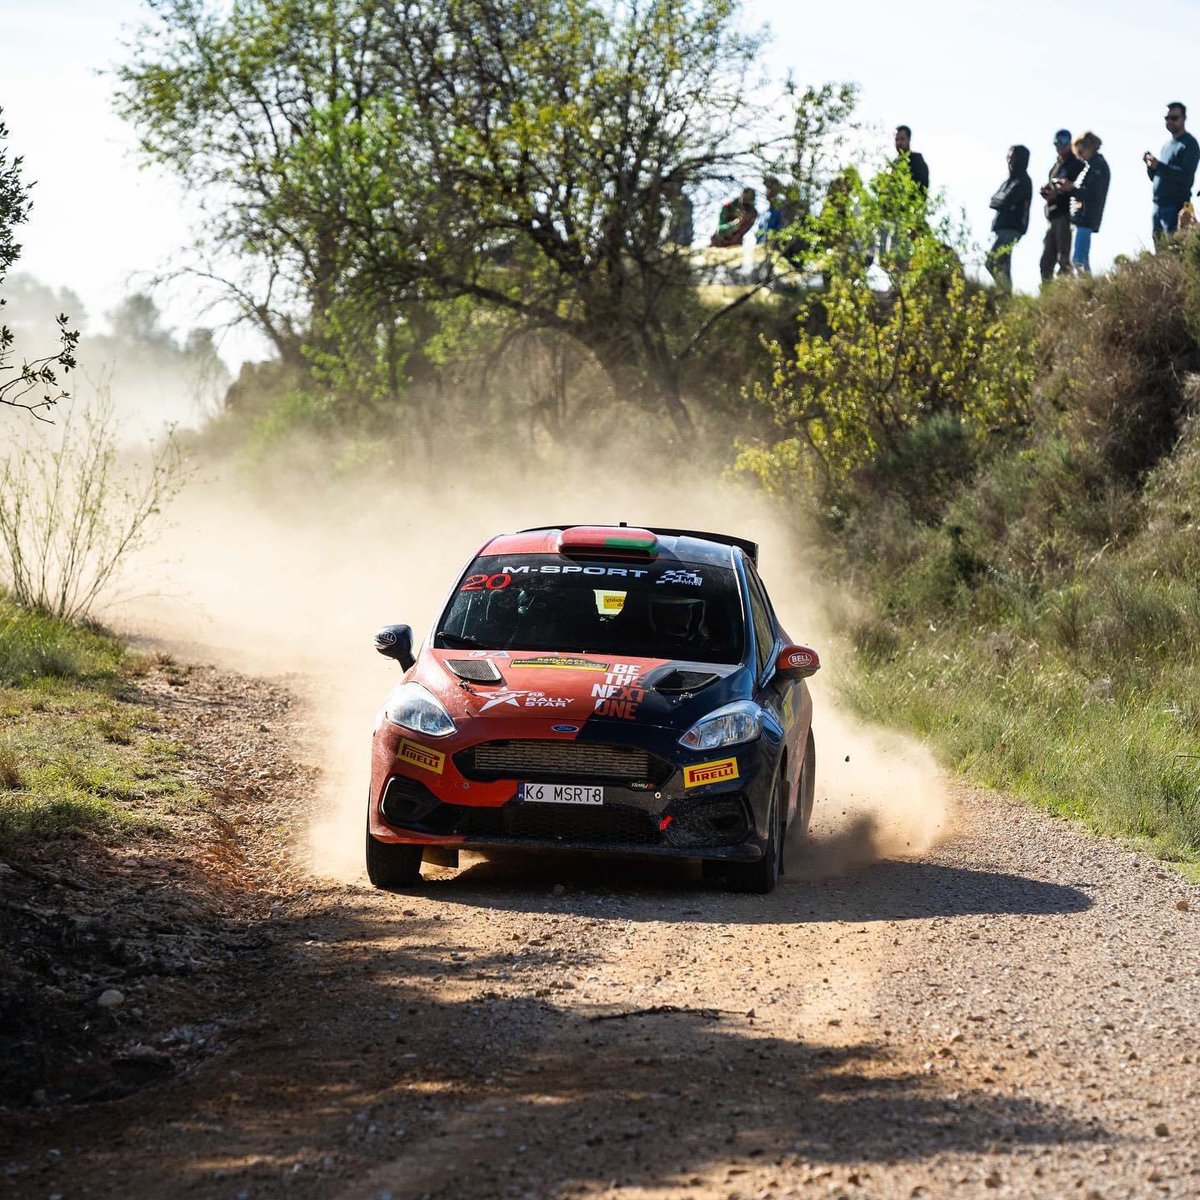 #RallyRACC Catalunya Costa-Dorada Complete ✅

13th O/A, 6th RC3 & 3rd FIA Rally Star Crew. 🥉

A super event and really happy with our progression with 1 round remaining! See you soon in the Lausitz-Rallye Germany in a few weeks time. 🇩🇪

#BETHENEXTONE #MIRALLYACADEMY